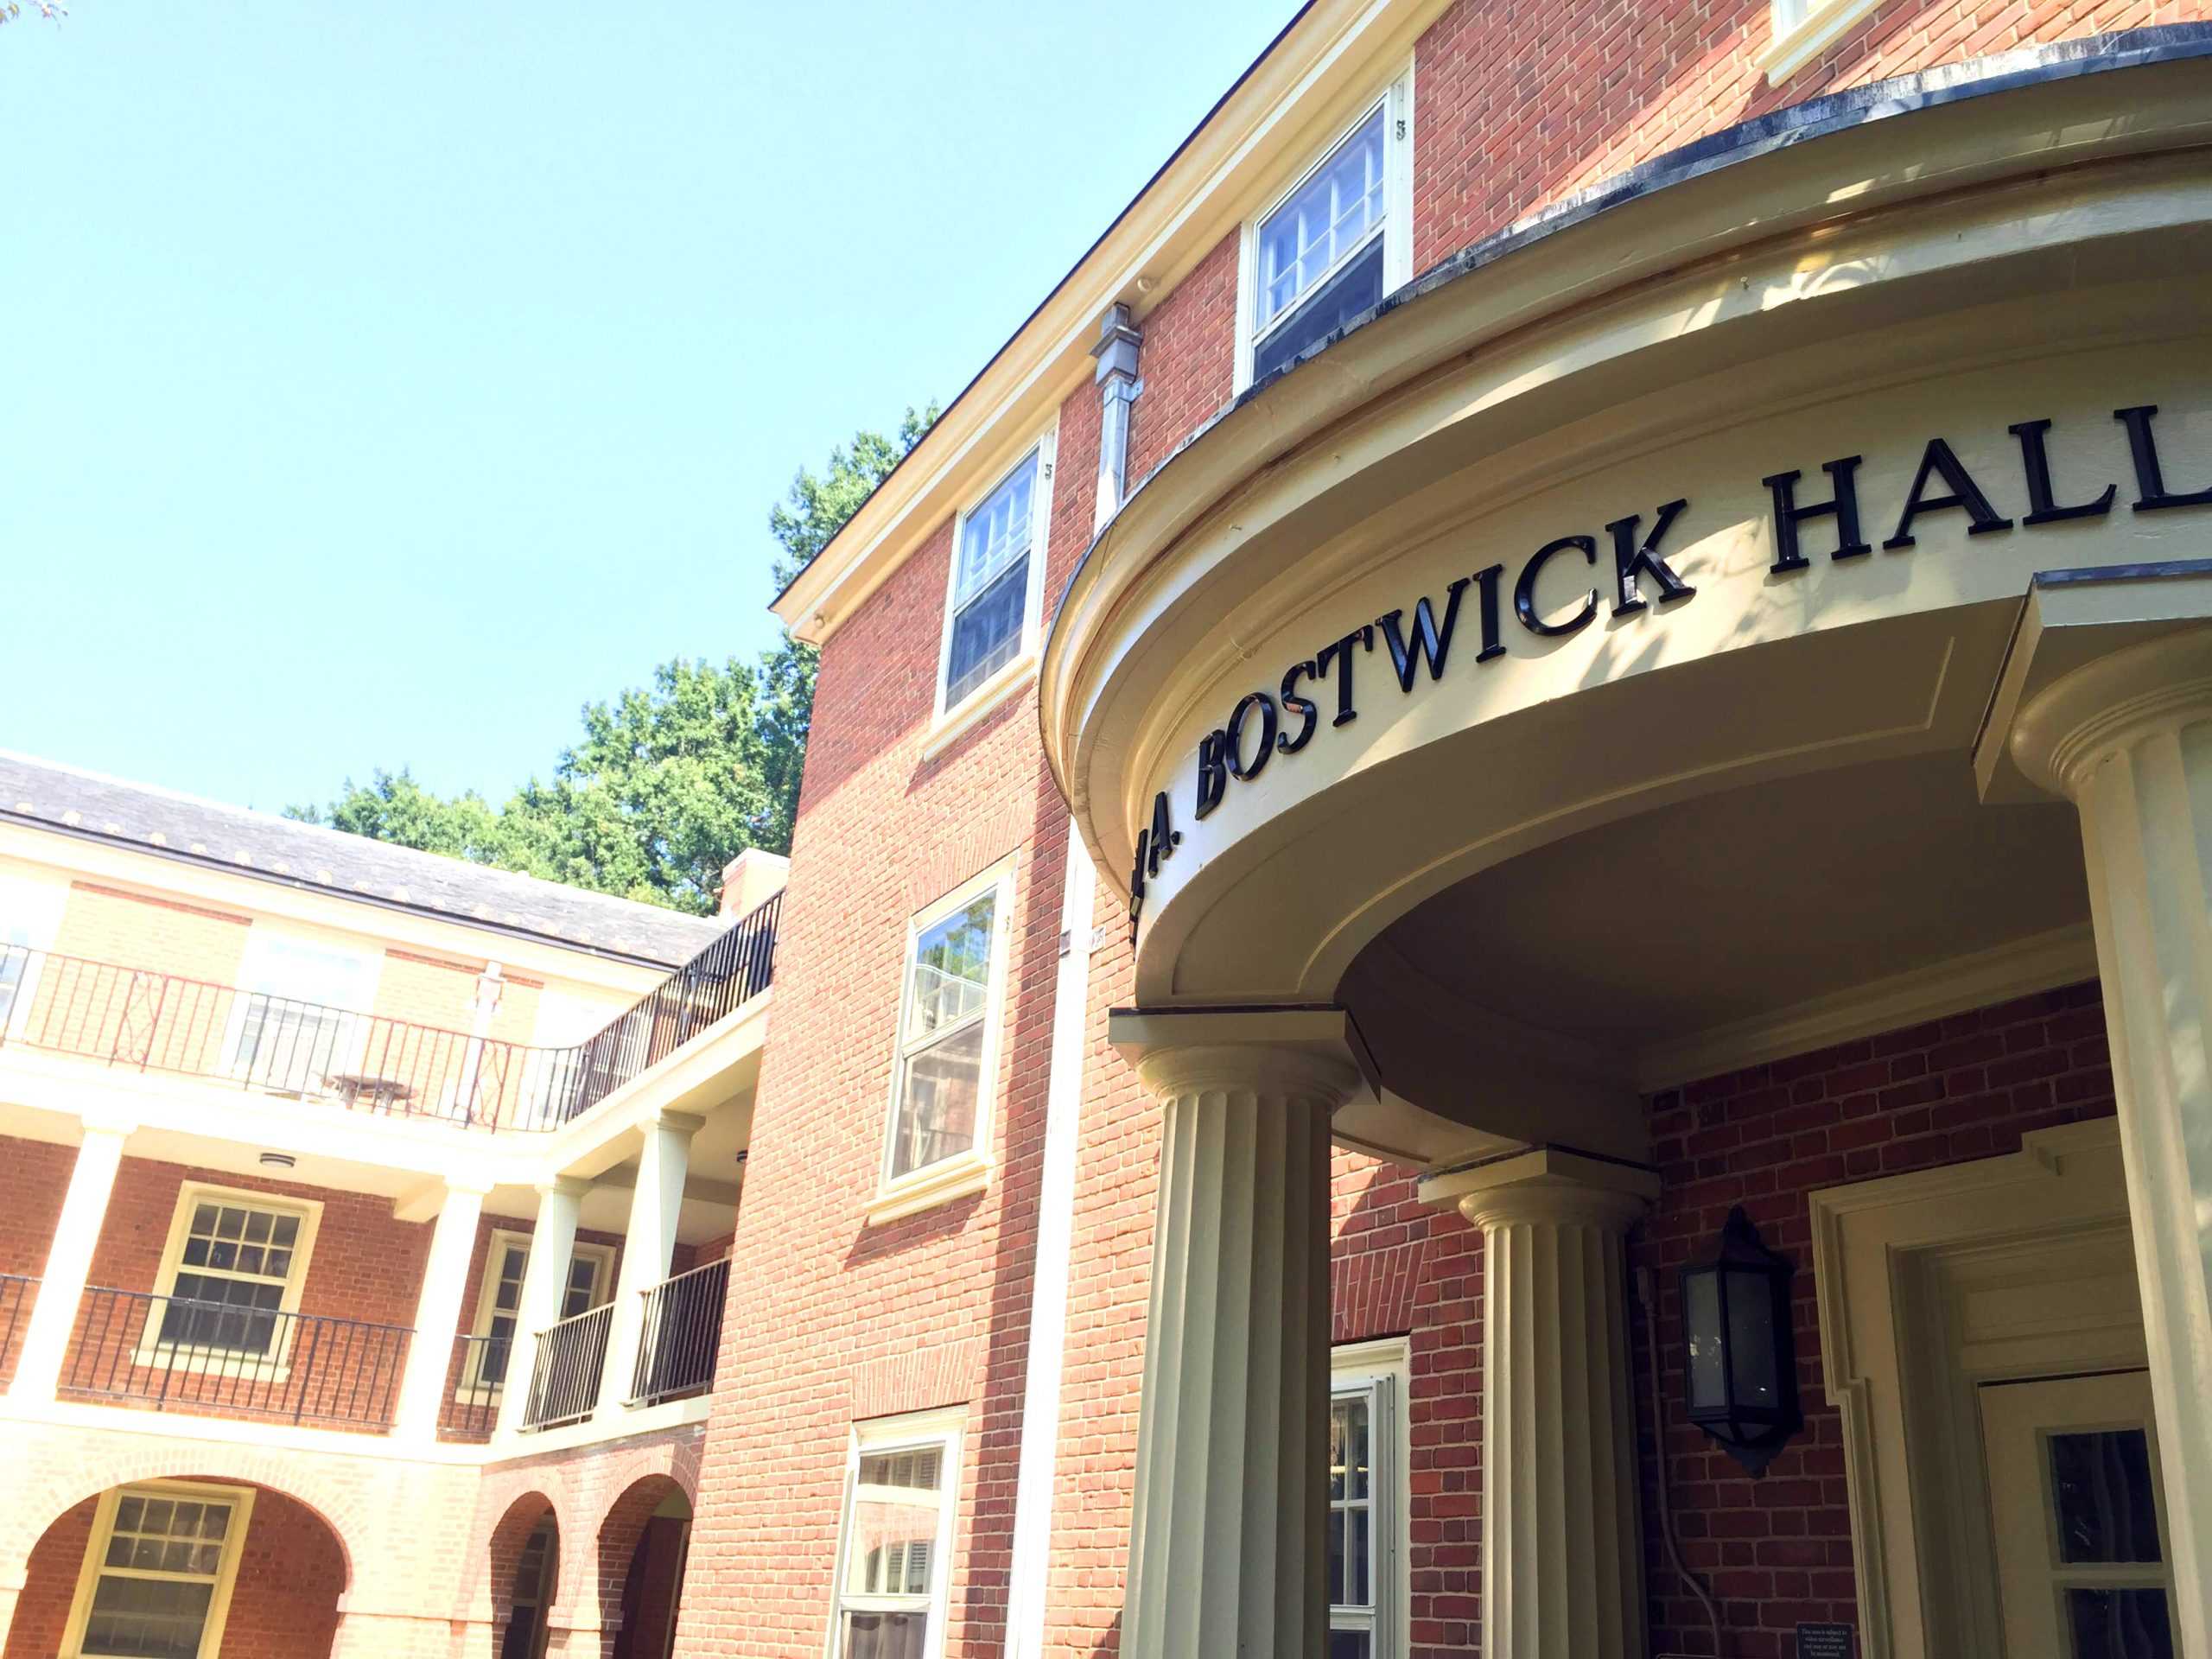 Age before beauty: the Bostwick Hall experience